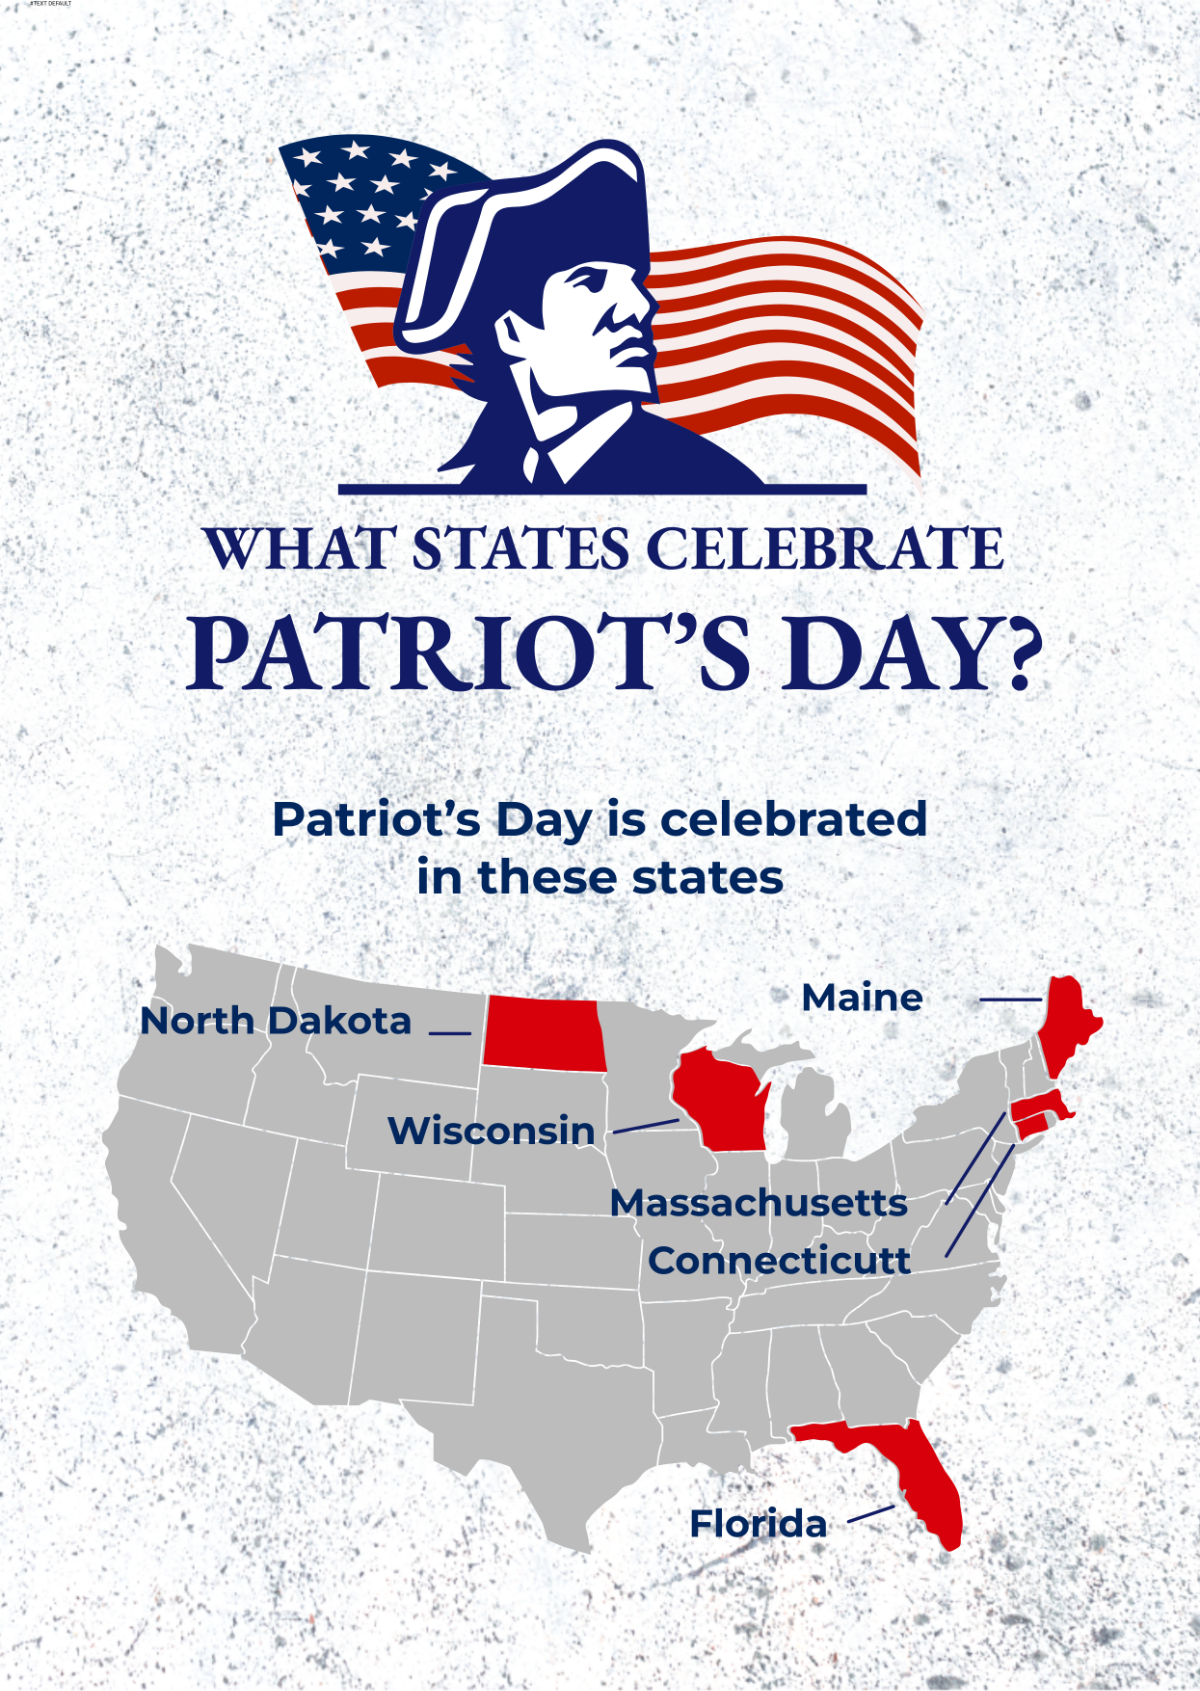 What States Celebrate Patriot's Day?